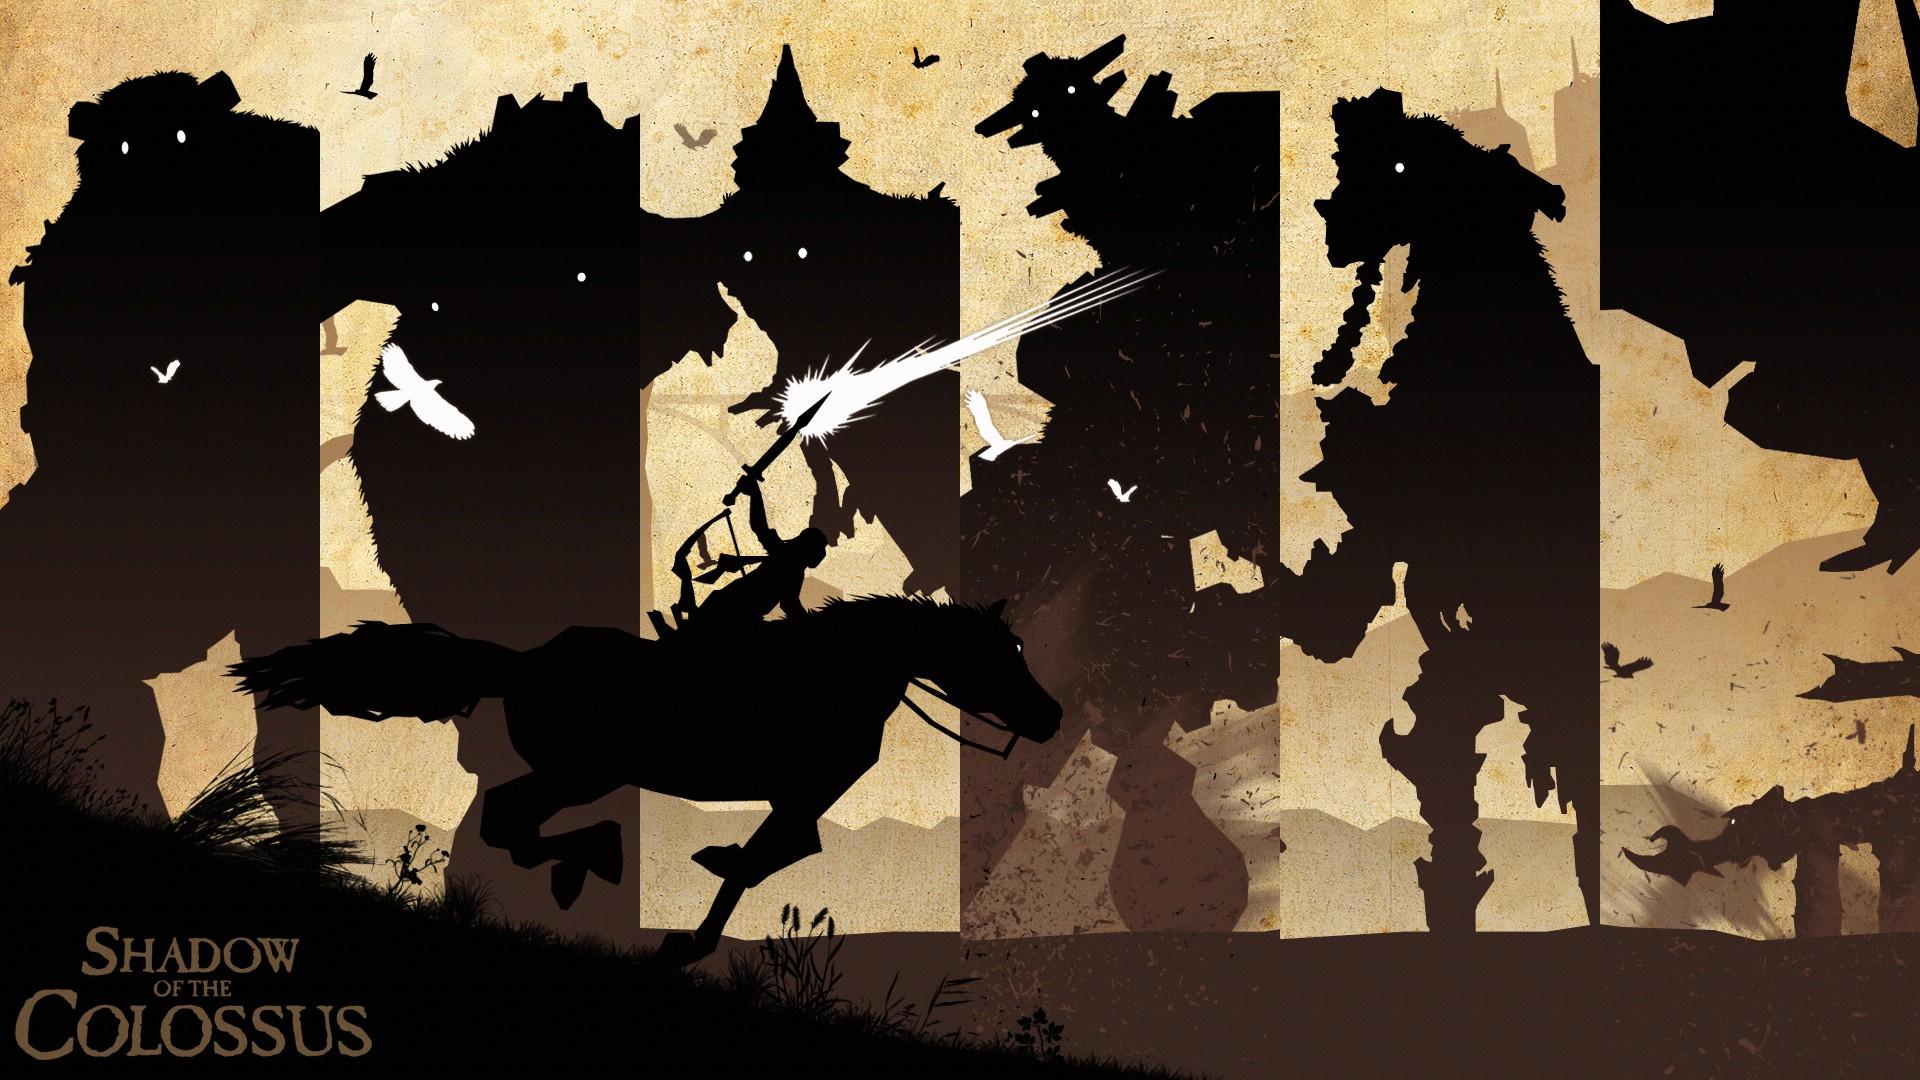 HD wallpaper, Wander, Shadow Of The Colossus, Video Games, Team Ico, Wander And The Colossus